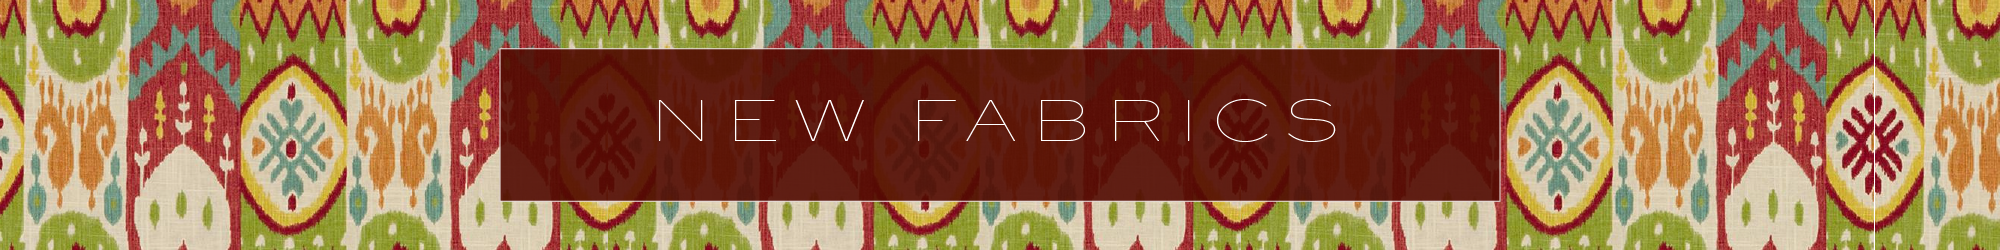 Zarin Fabrics Carries Over 10,000 Rolls Of In-Stock Fabrics From textiles Houses Such As Robert Allen, Kravet, Missoni, Fabricut, Holly Hunt, an Many More. We Are The Largest In-Stock Fabric Warehouse in The Metropolitan Area, and We Are Happy To Assist You With Your Project. Not Sure About A Fabric? Order a Free Swatch Sample! We Look Forward To Working With You!